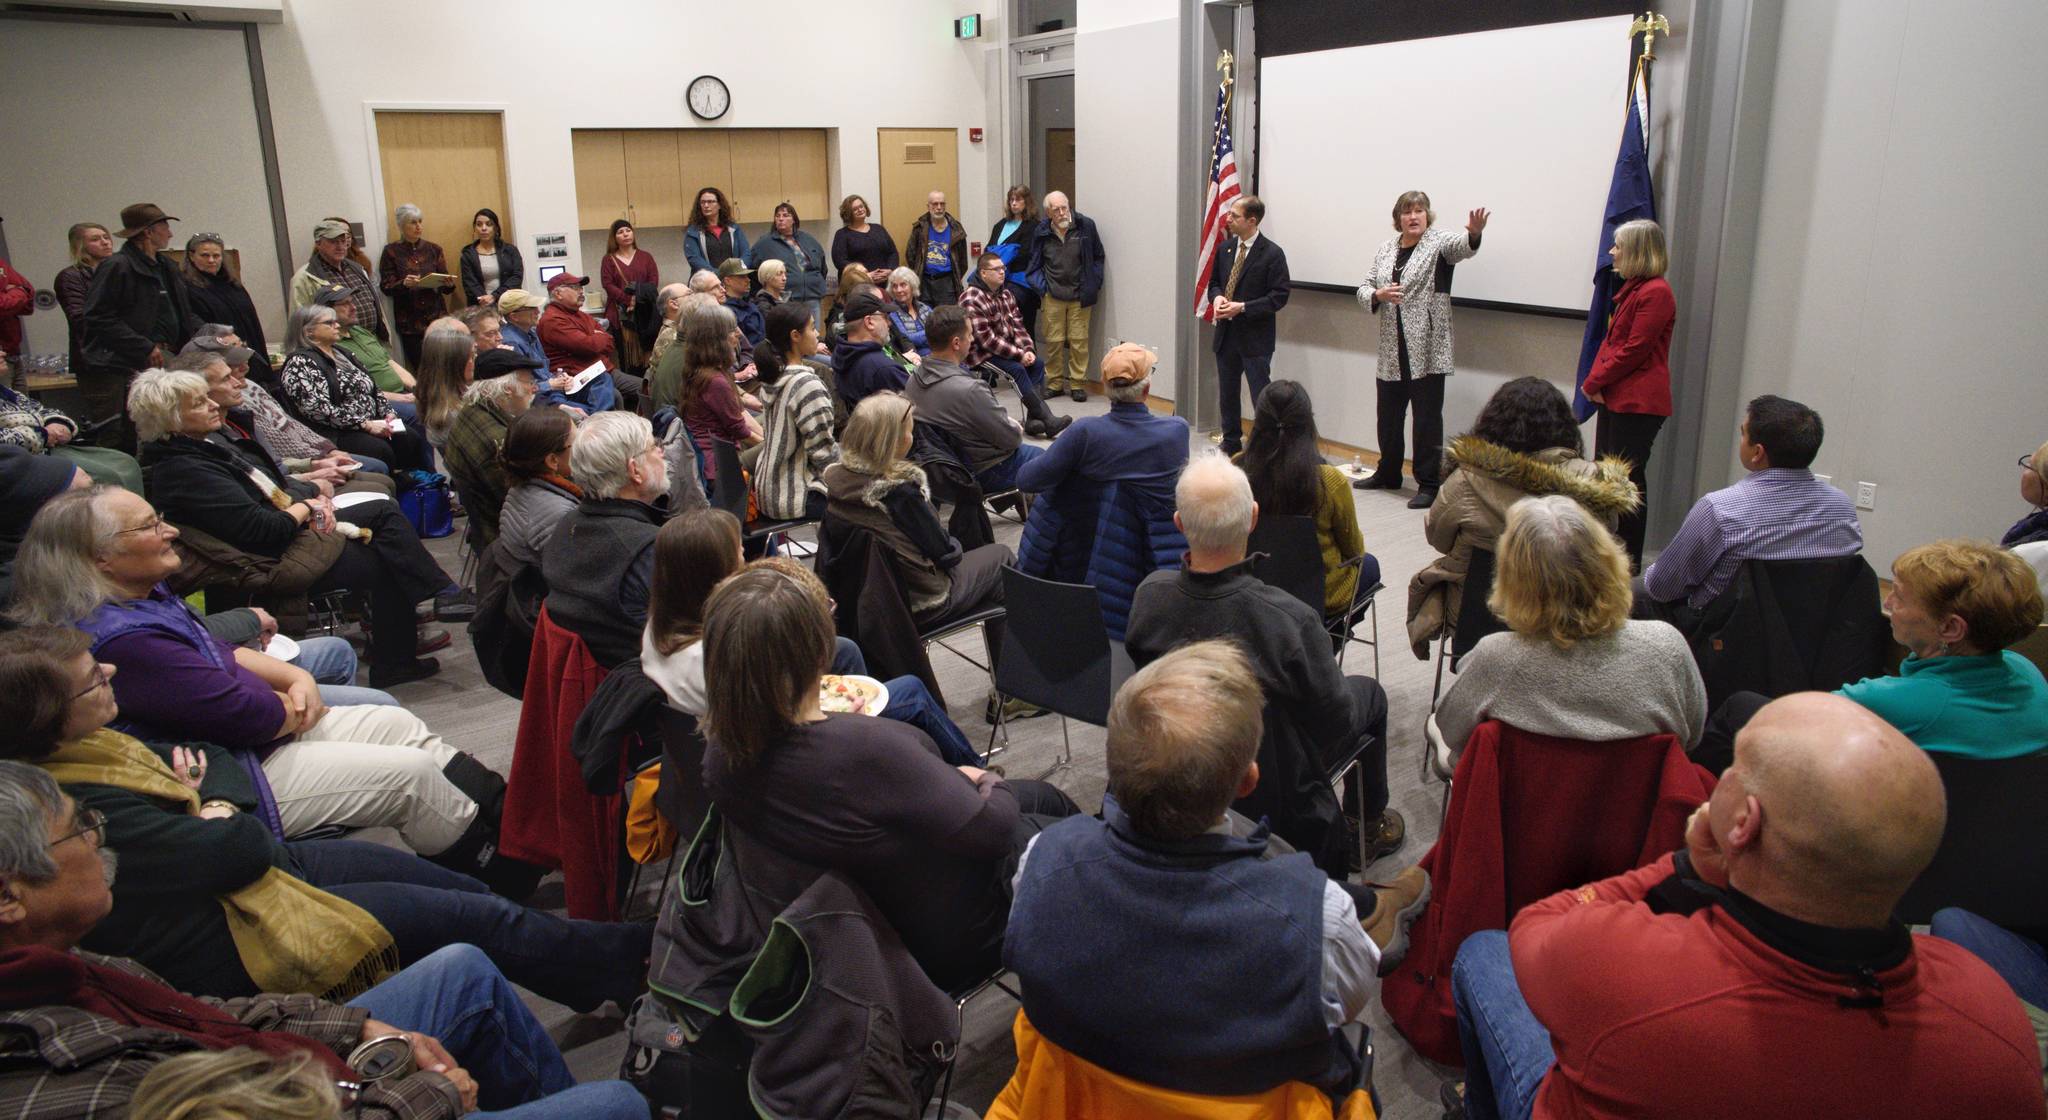 Juneau’s legislators, Sen. Jesse Kiehl and Reps. Sara Hannan and Andi Story, talk to a standing room only crowd at a town hall meeting at the Mendenhall Valley Public Library on Tuesday, Jan. 29, 2019. (Michael Penn | Juneau Empire)